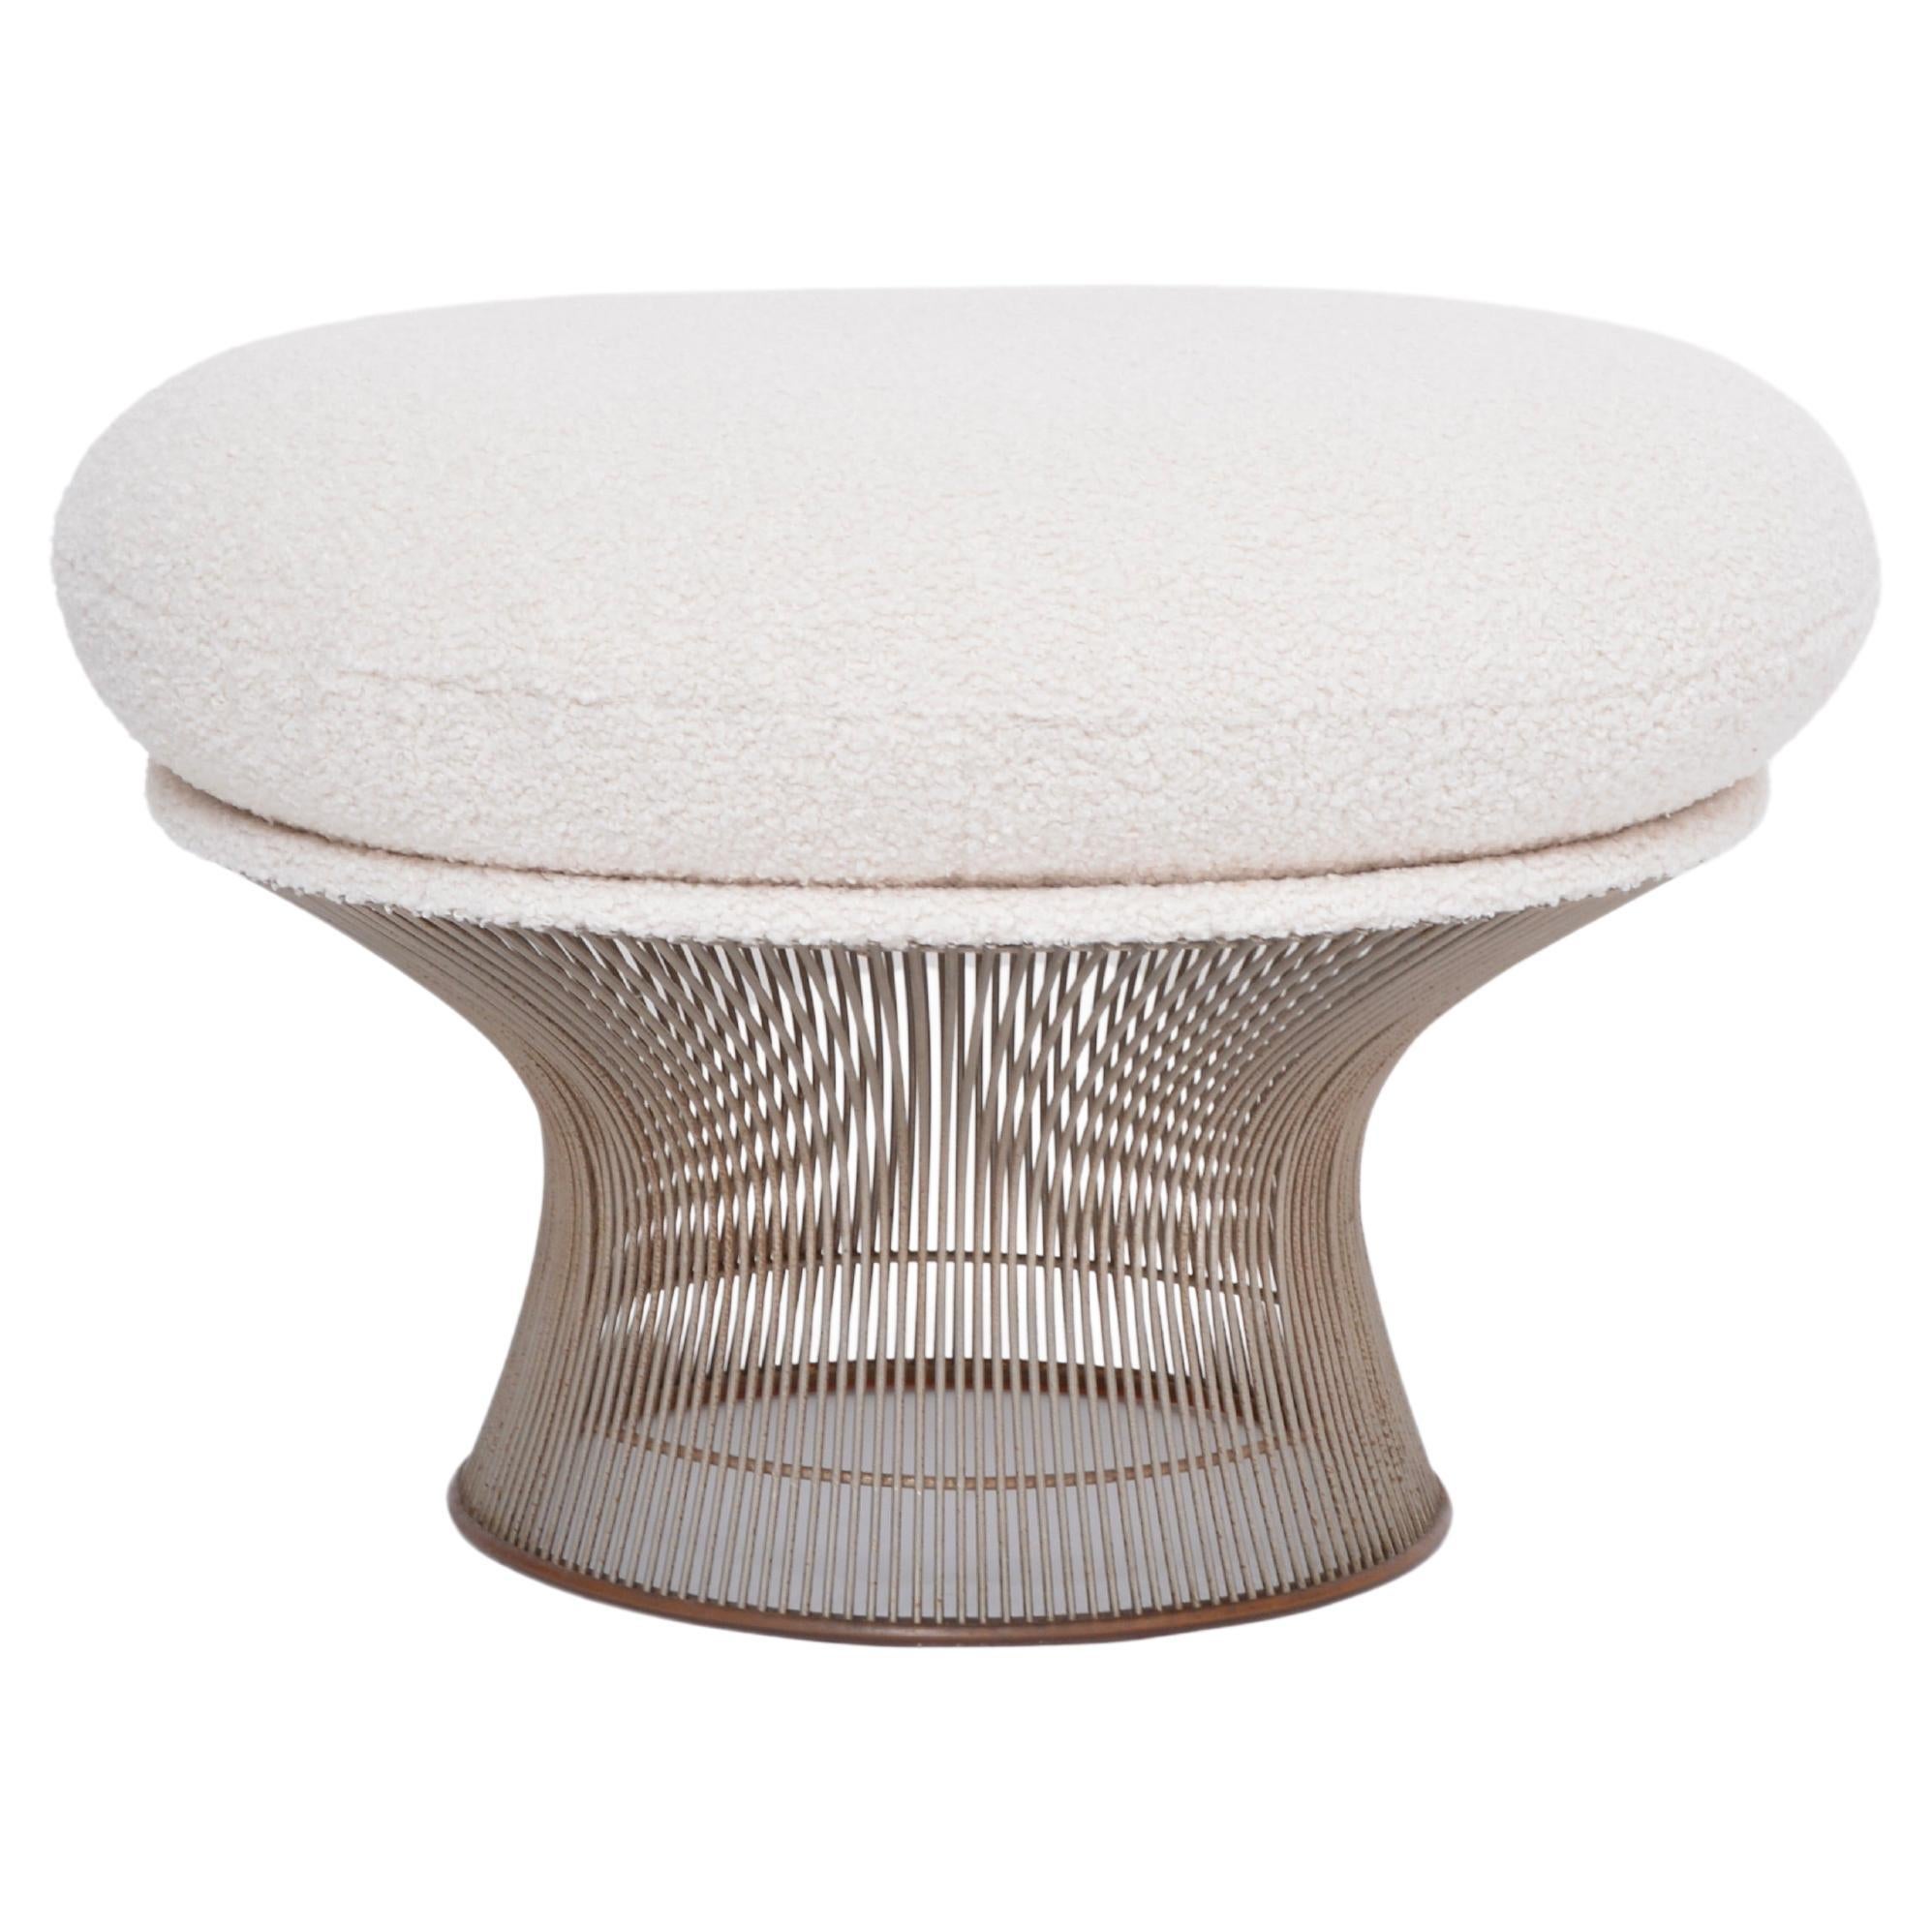 White reupholstered vintage Mid-century ottoman by Warren Platner for Knoll